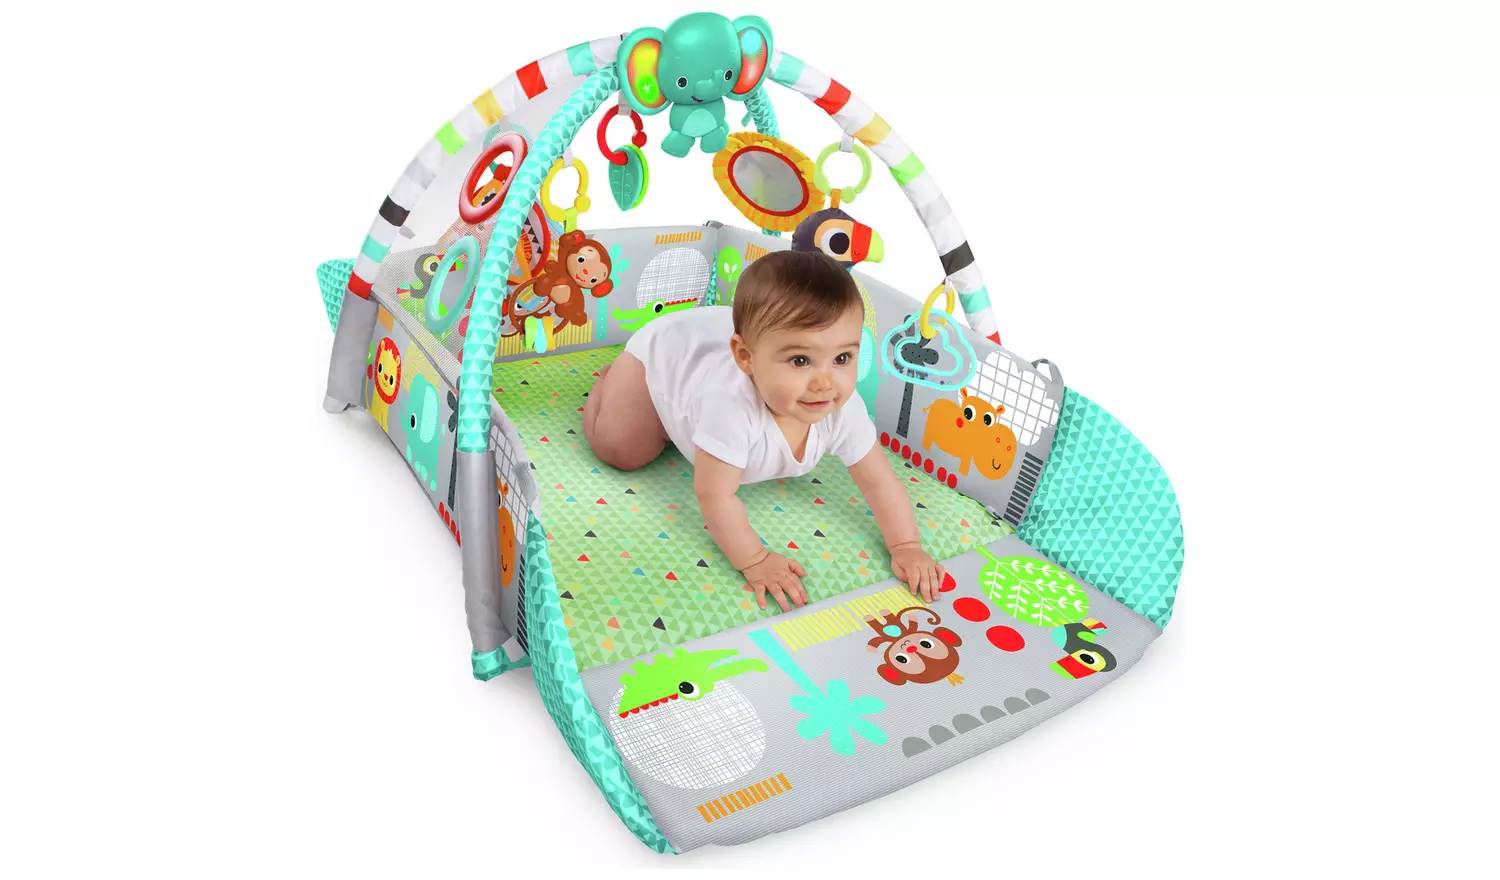 Bright Starts 5-in-1 Your Way Ball Play Activity Gym